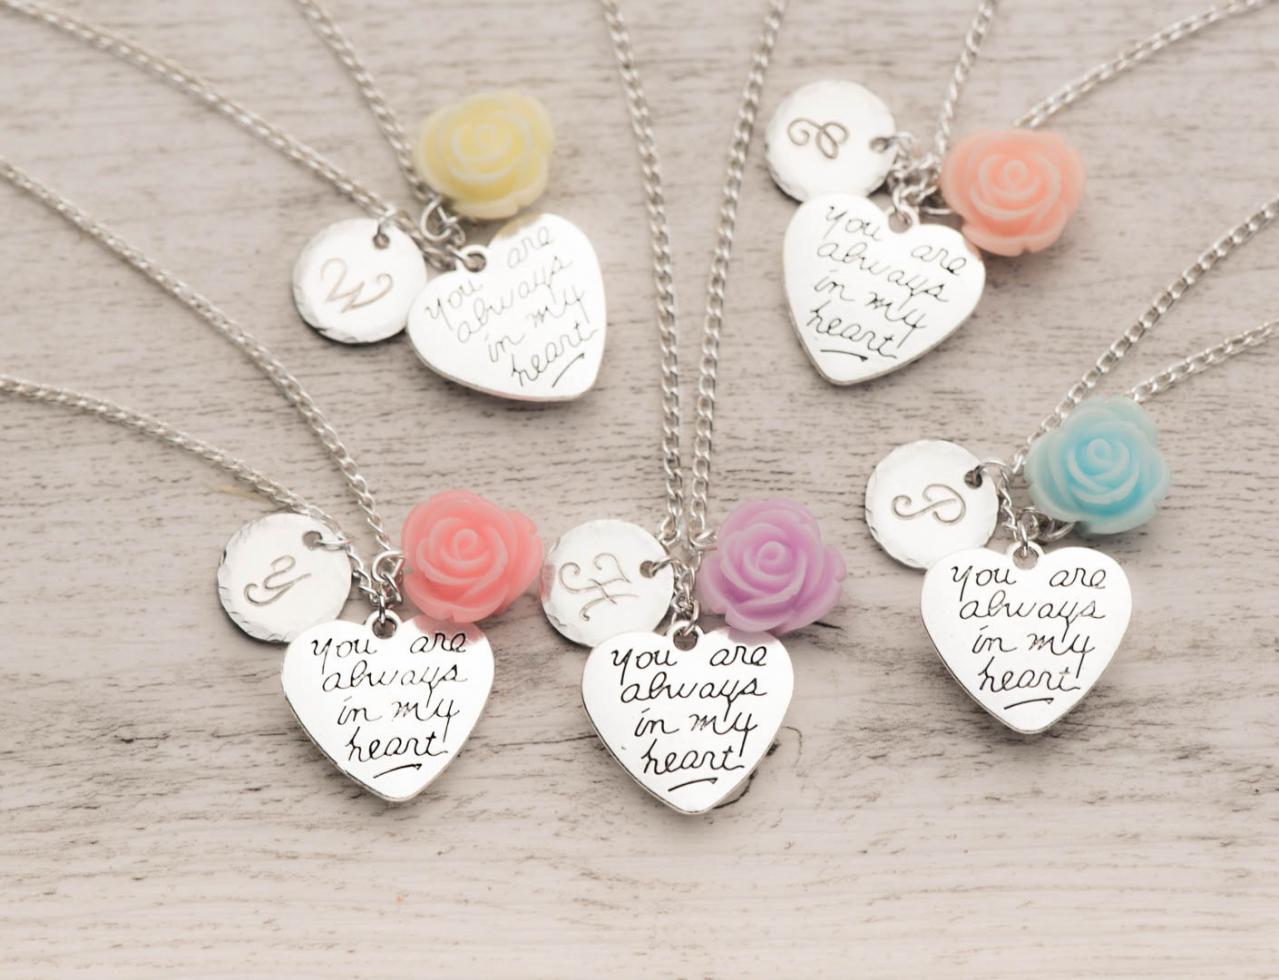 Hand stamped custom necklace, 5 bff necklaces in a set of 5 silver heart necklaces - engraved initial necklace - set of love necklaces with always in my heart note